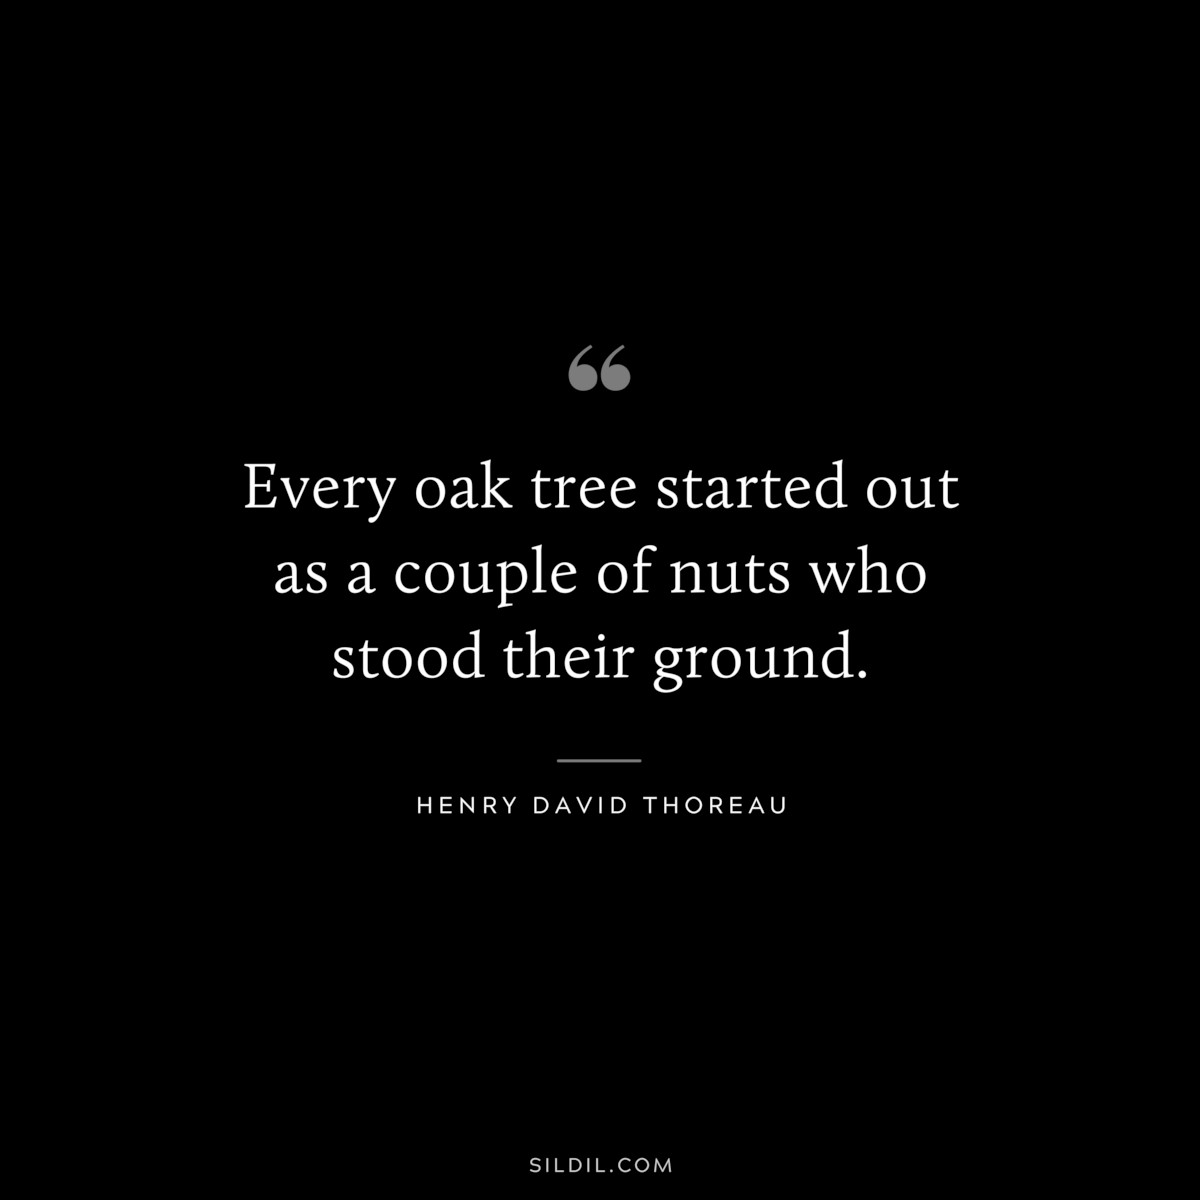 Every oak tree started out as a couple of nuts who stood their ground. — Henry David Thoreau